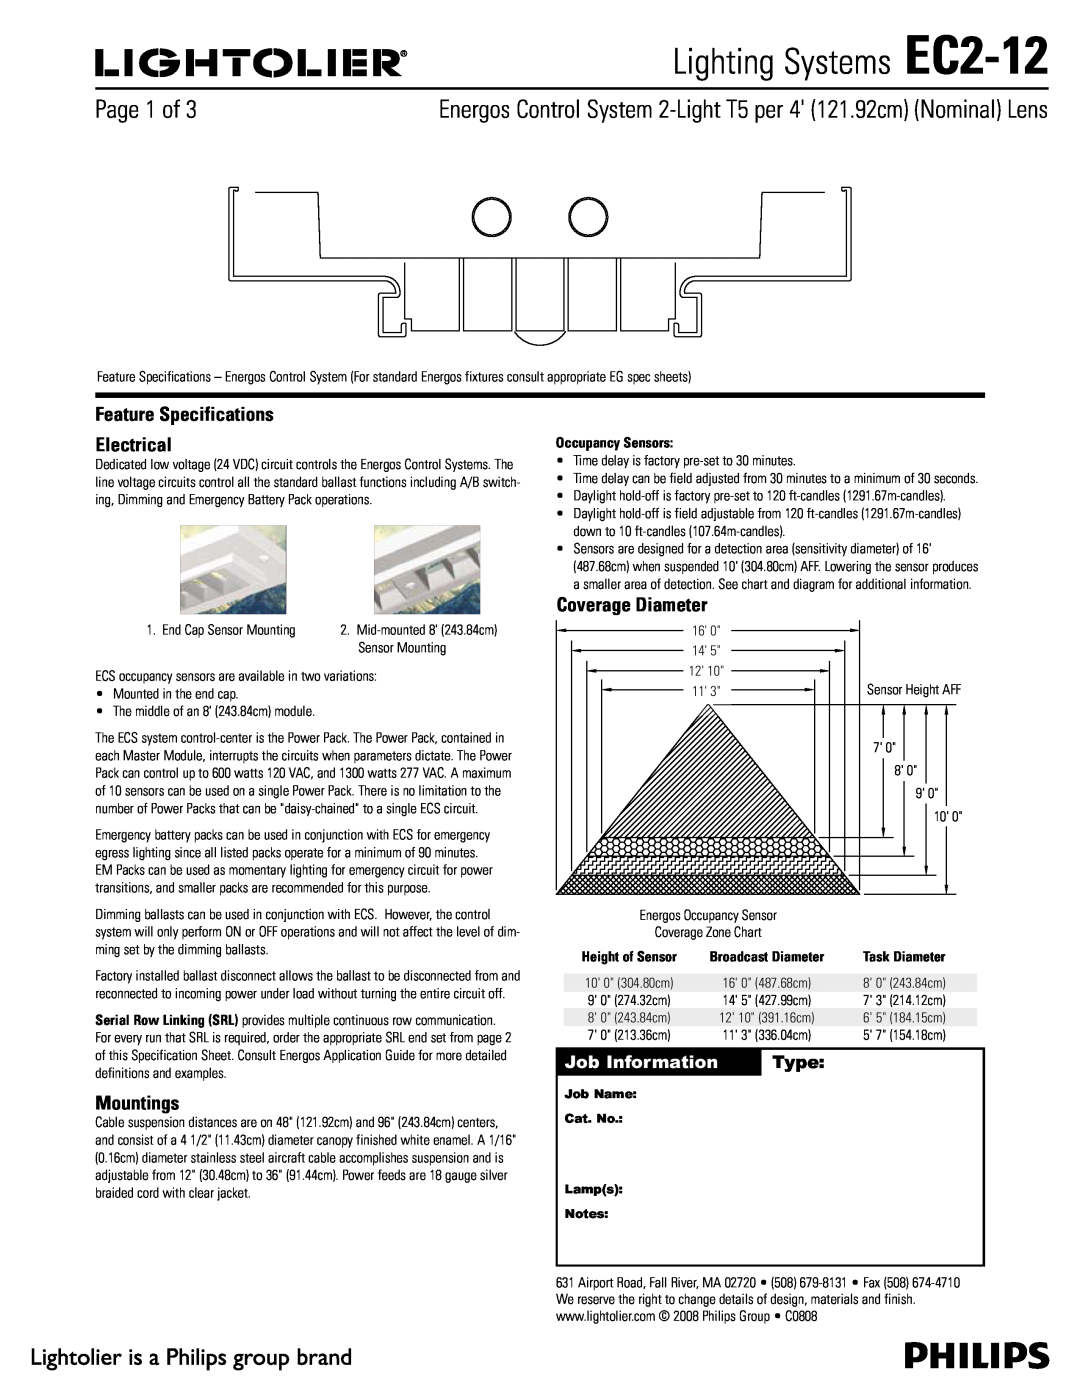 Lightolier specifications Lighting Systems EC2-12, Feature Specifications Electrical, Mountings, Coverage Diameter 